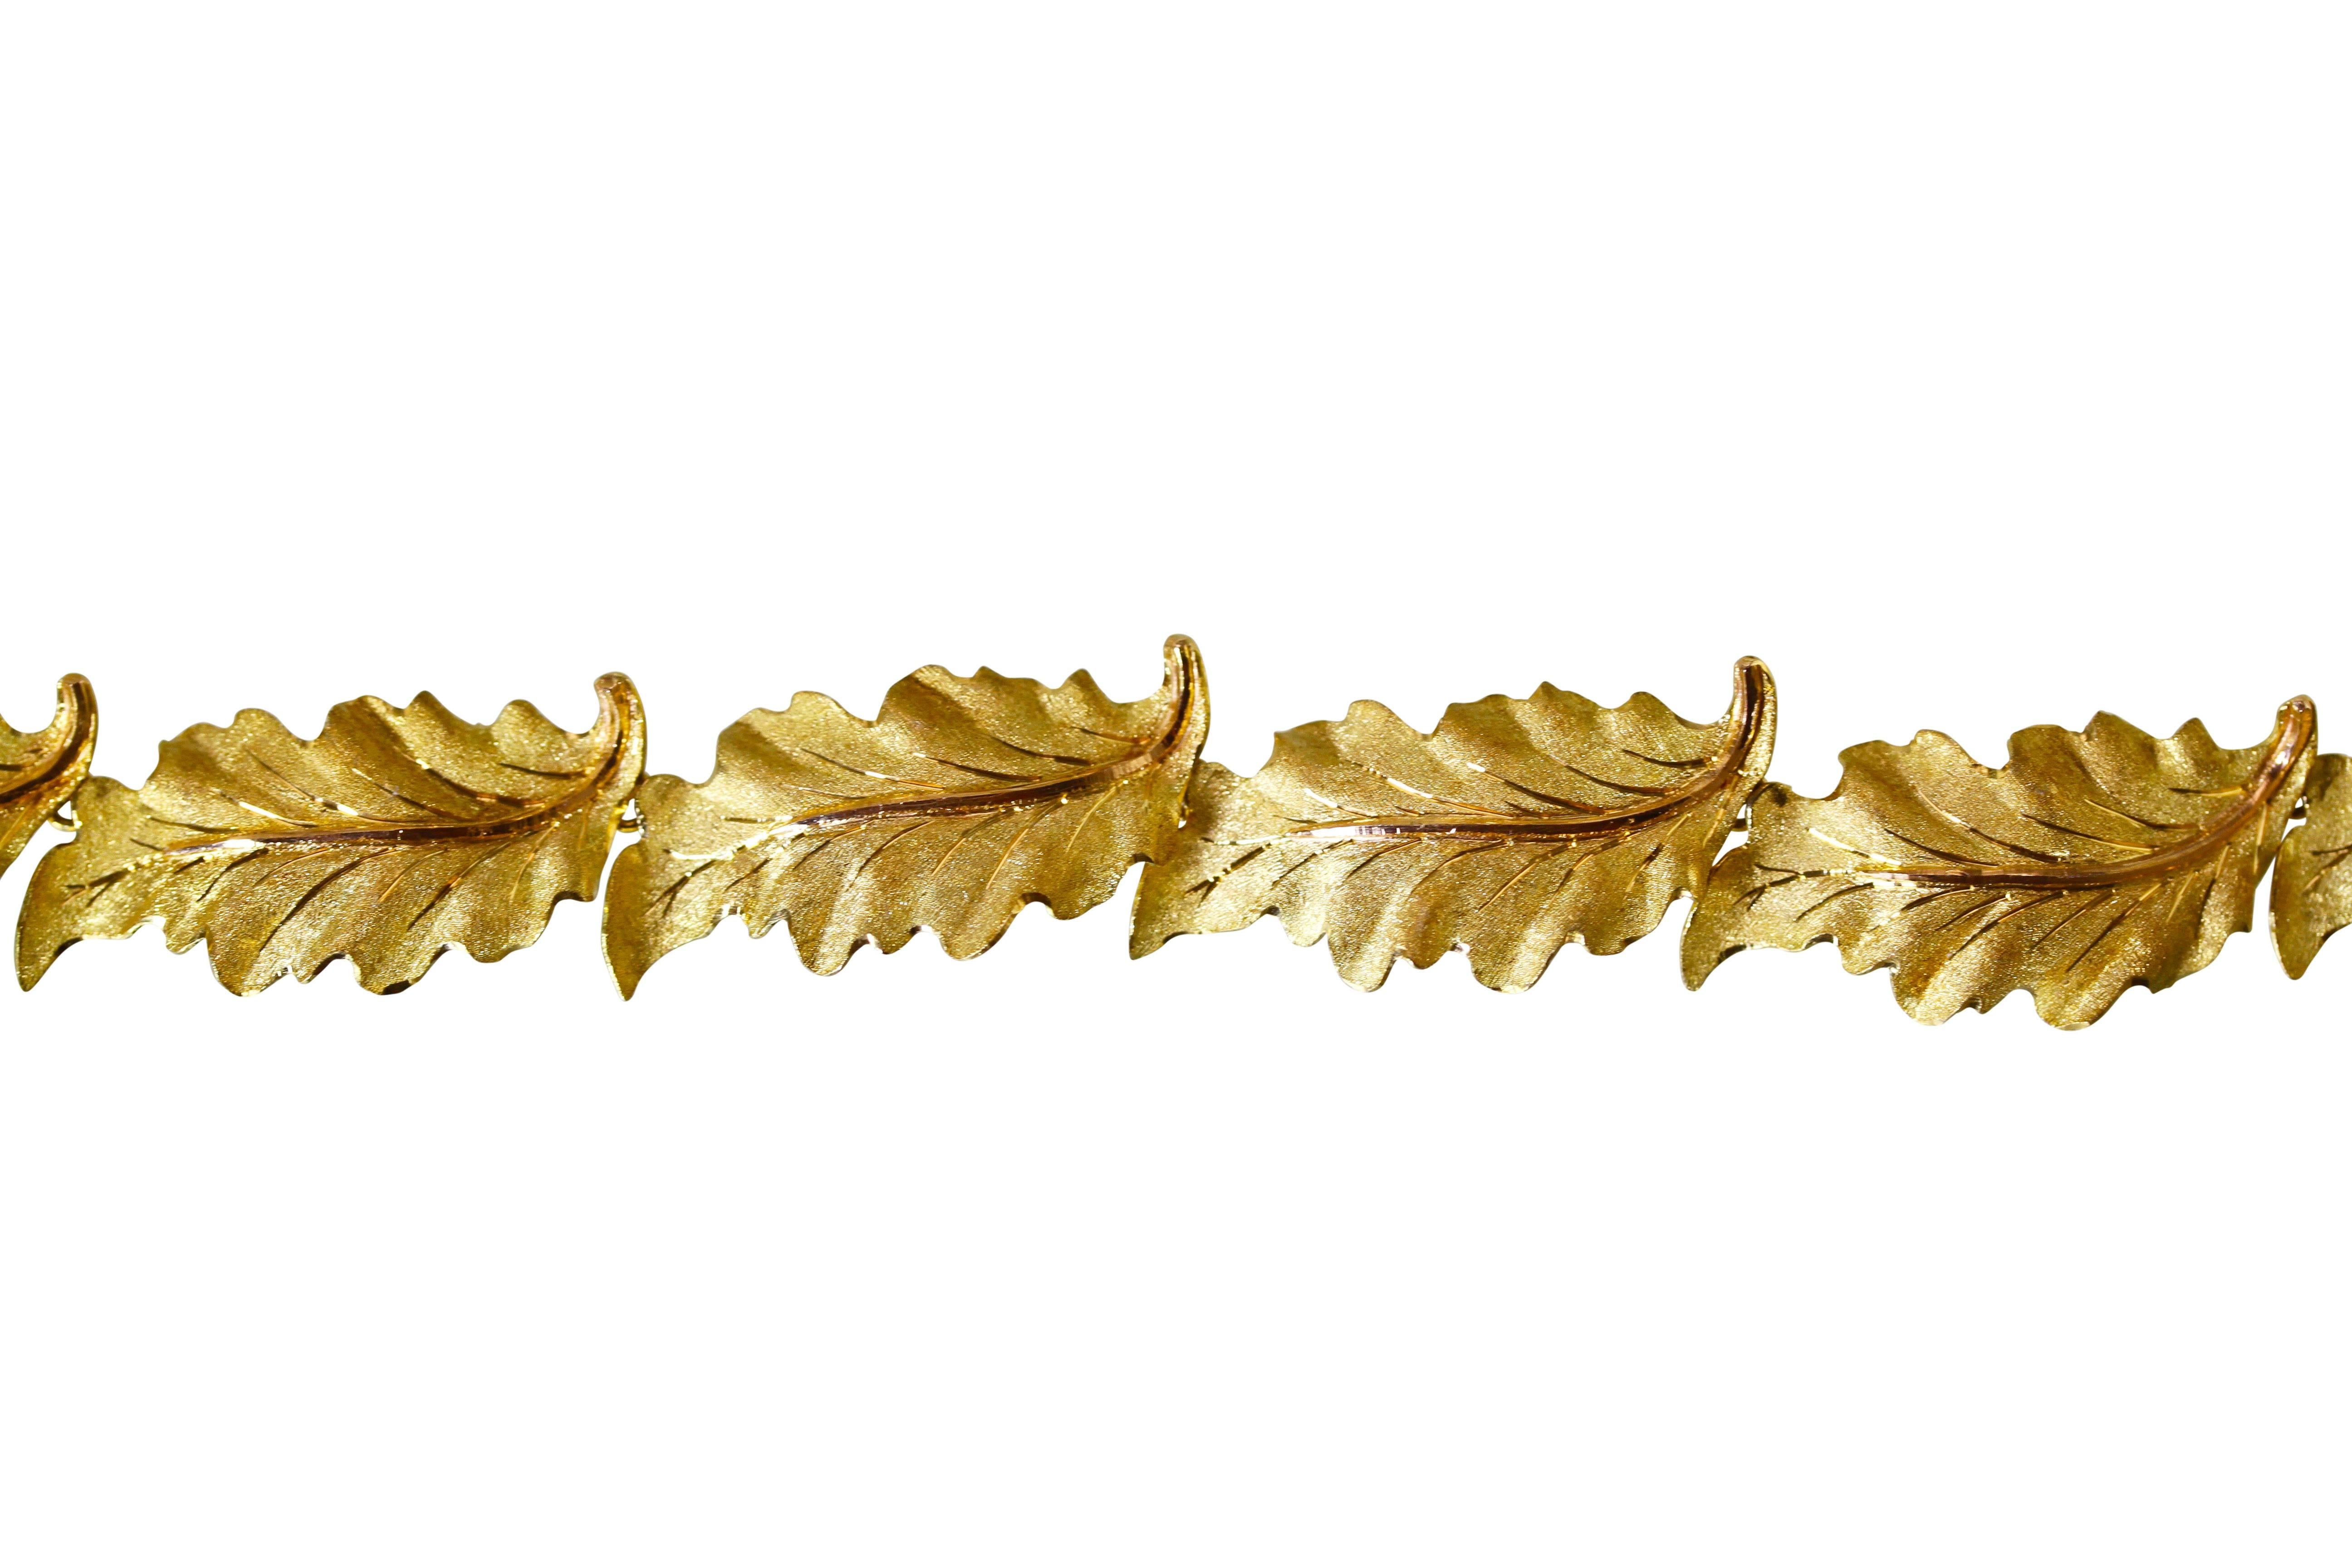 An 18 karat yellow gold necklace by Buccellati, Italy, designed as a series of textured gold leaves, length 15 inches, gross weight 41.6 grams, signed Buccellati, Italy, stamped 750 with Italian assay marks.